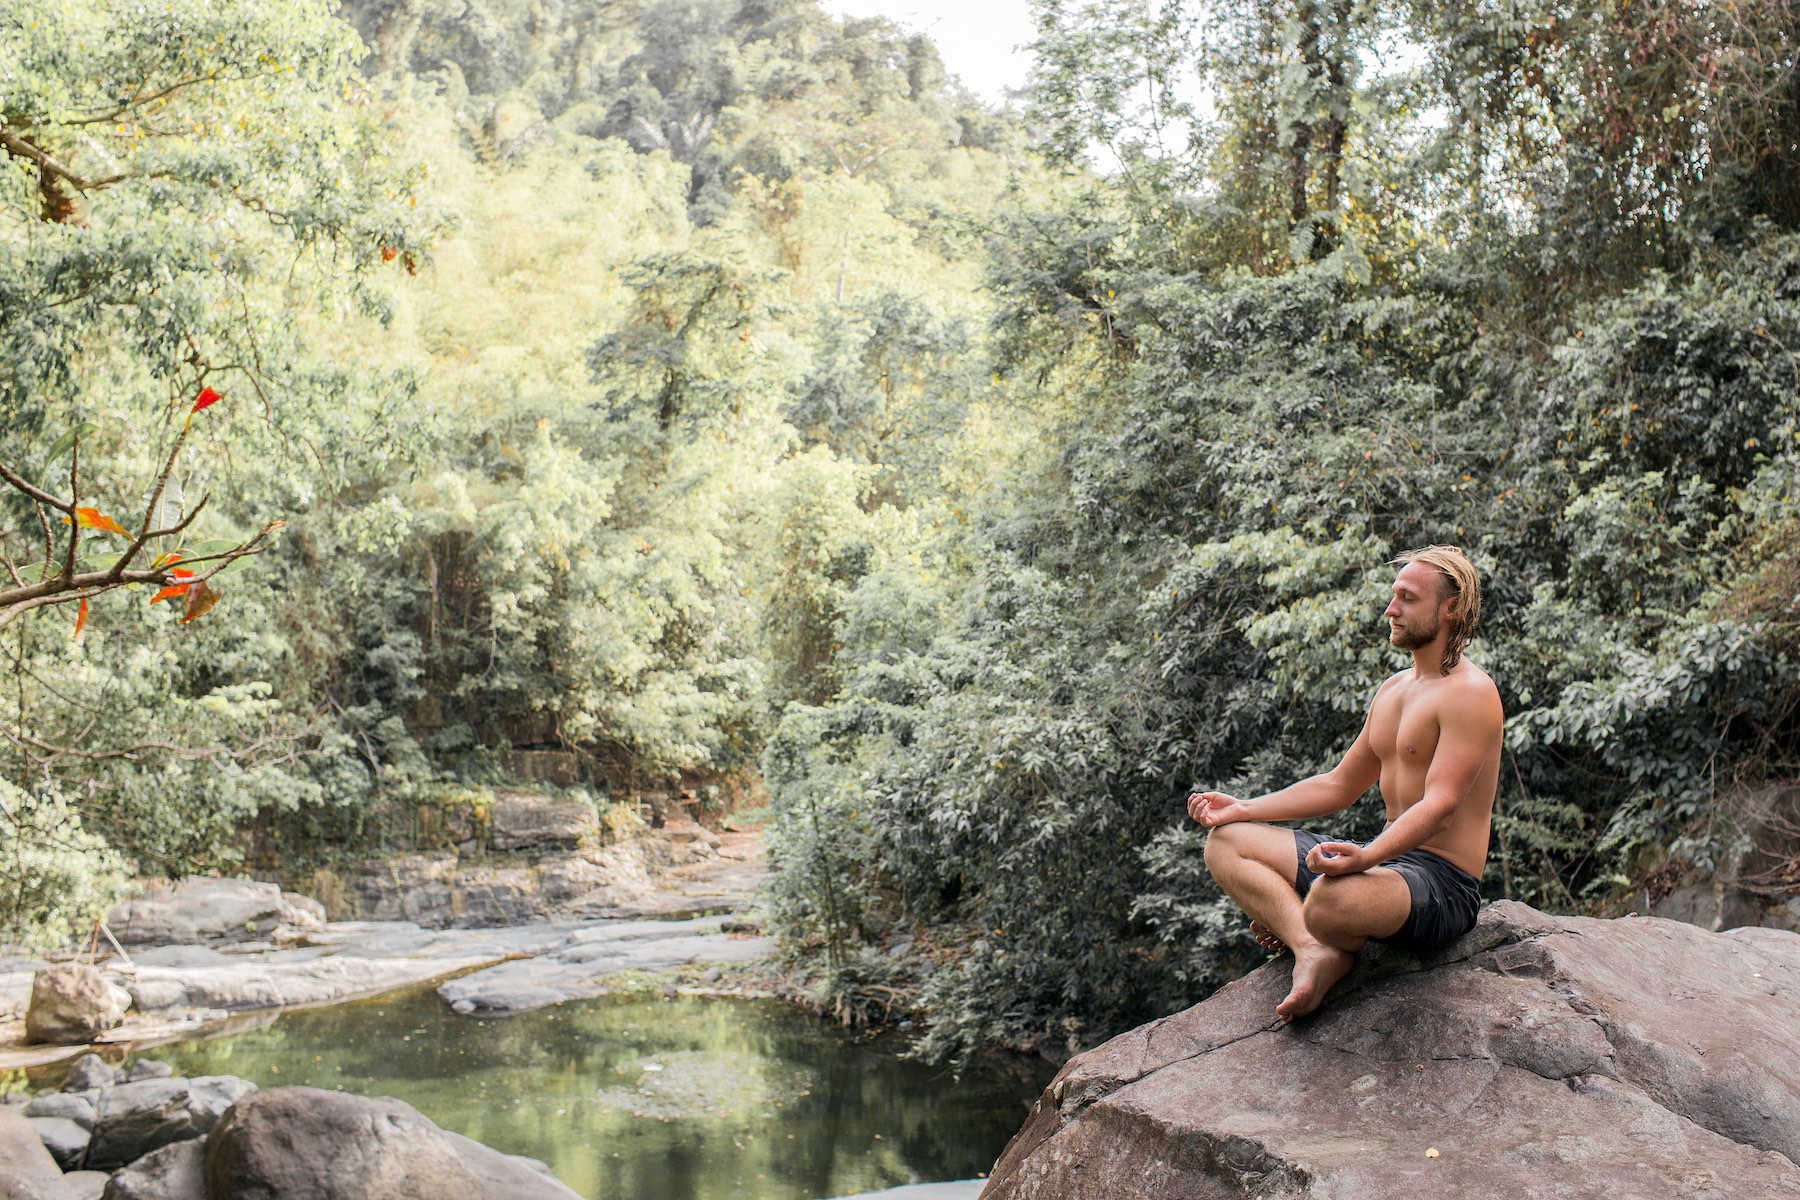 the guy is meditating on a stone in the forest